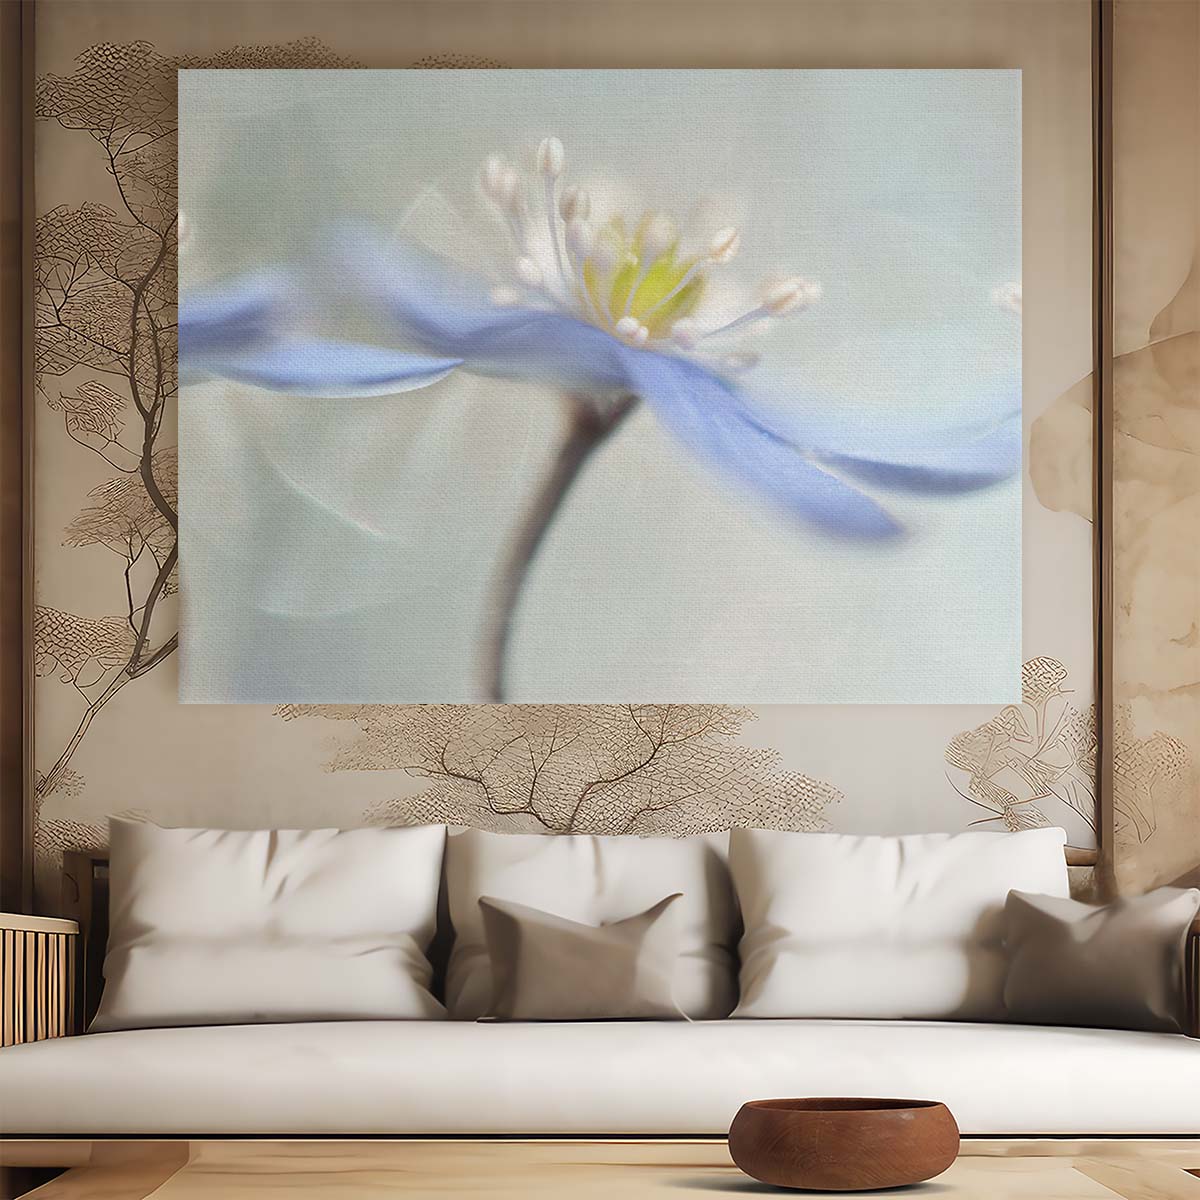 Delicate Summer Anemone Trio Macro Wall Art by Luxuriance Designs. Made in USA.